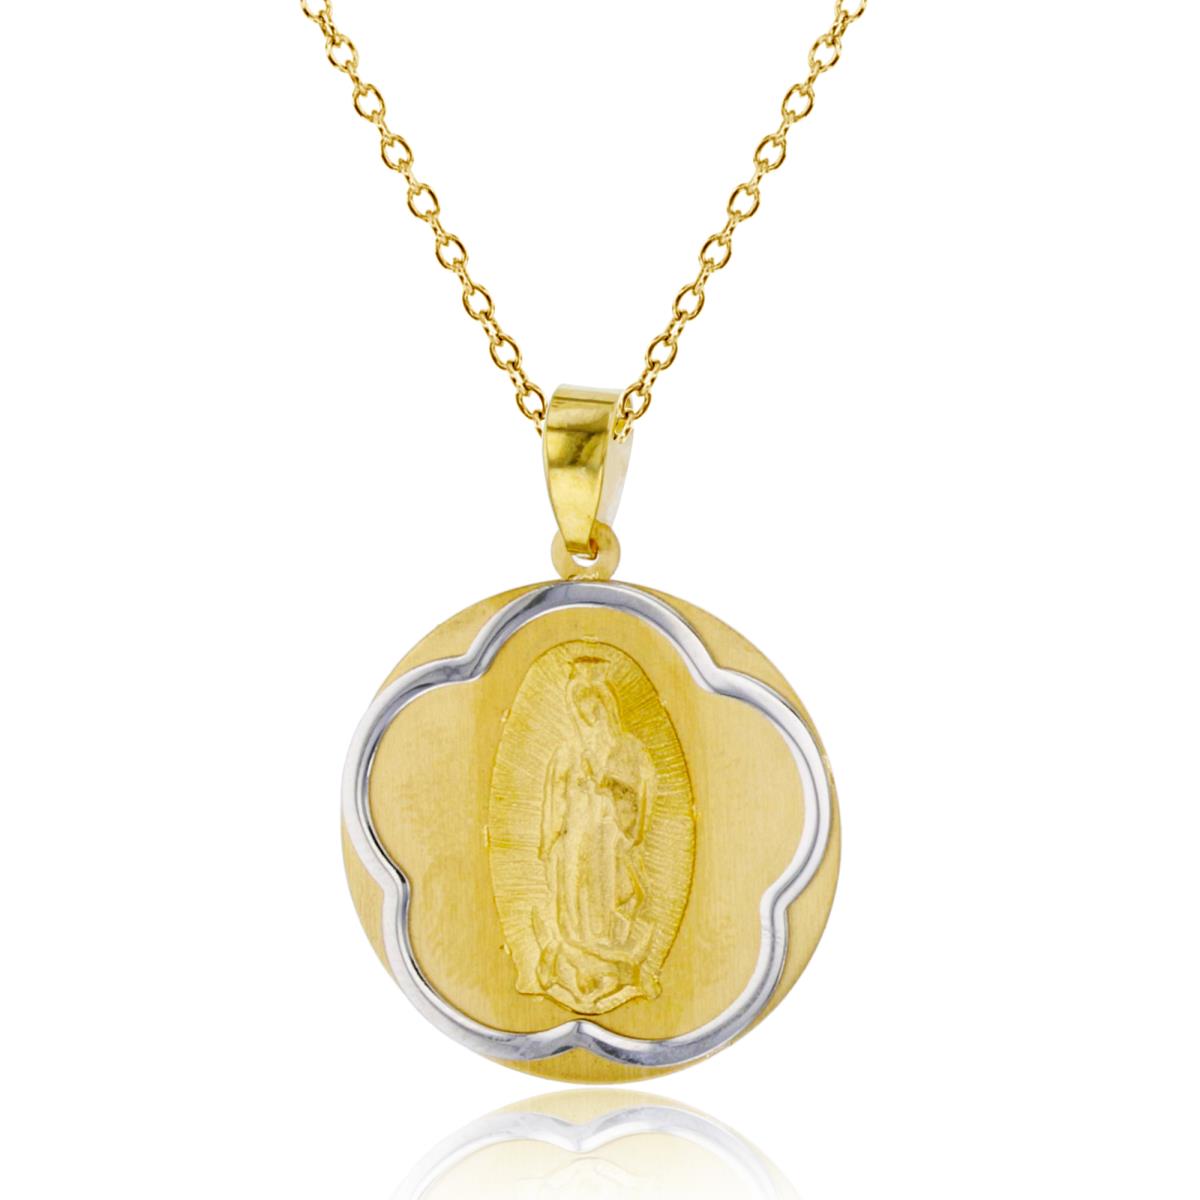 14K Two-Tone Gold 25x18mm Satin Virgin Mary Clover Medallion 18" Necklace